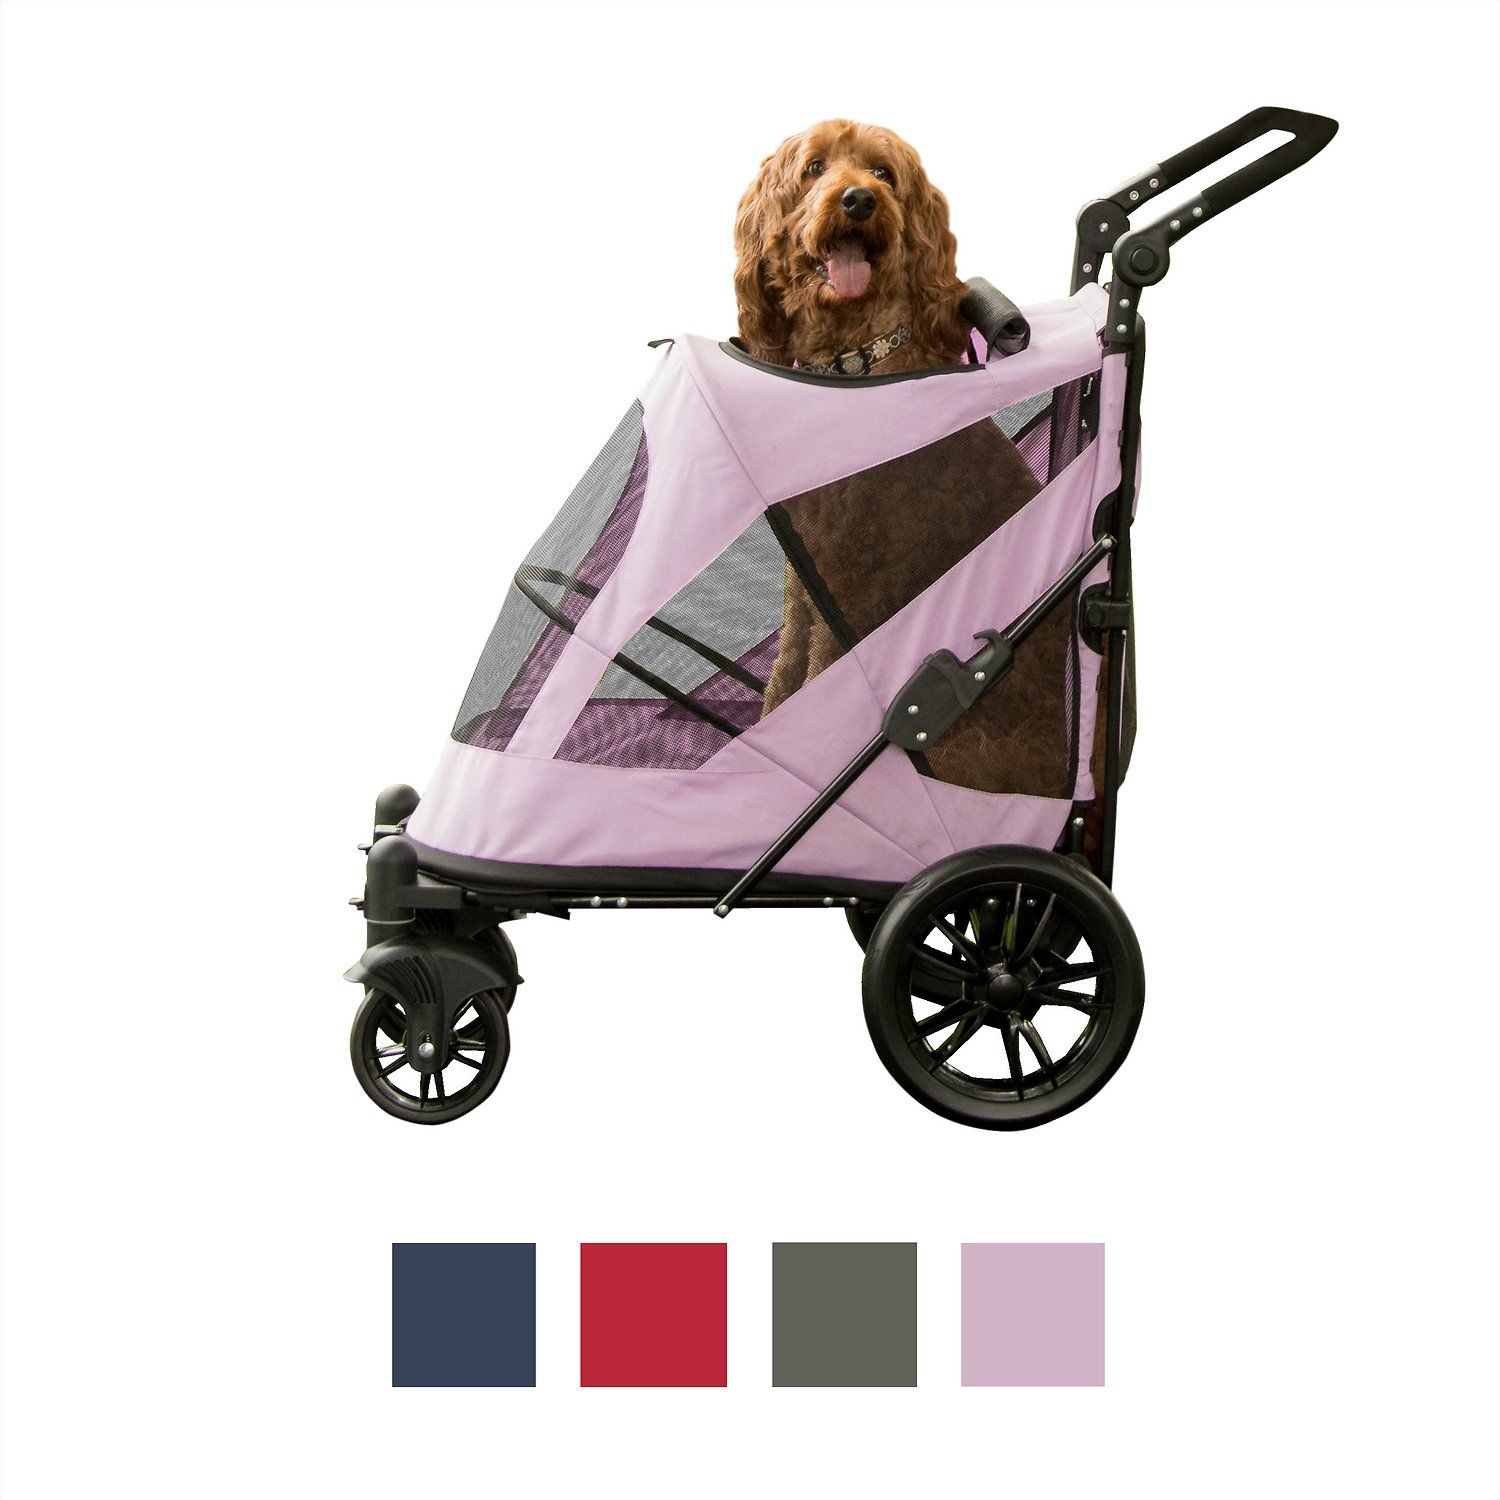 baby stroller with dog compartment